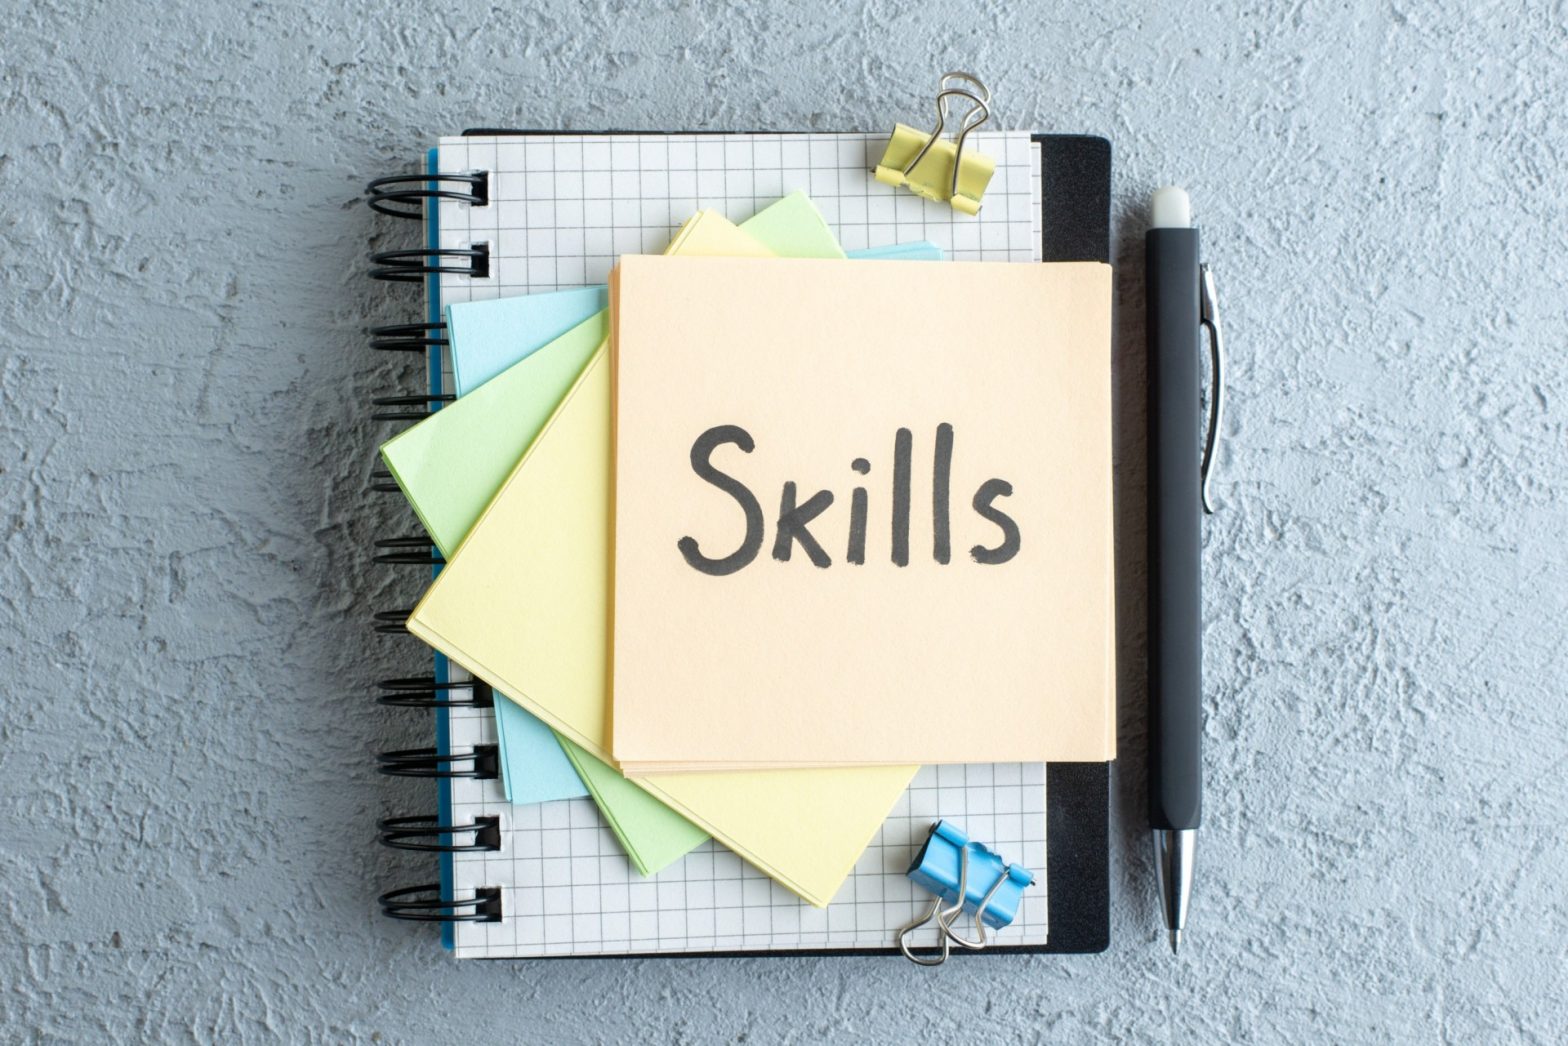 Important skills for reliable realtors to have